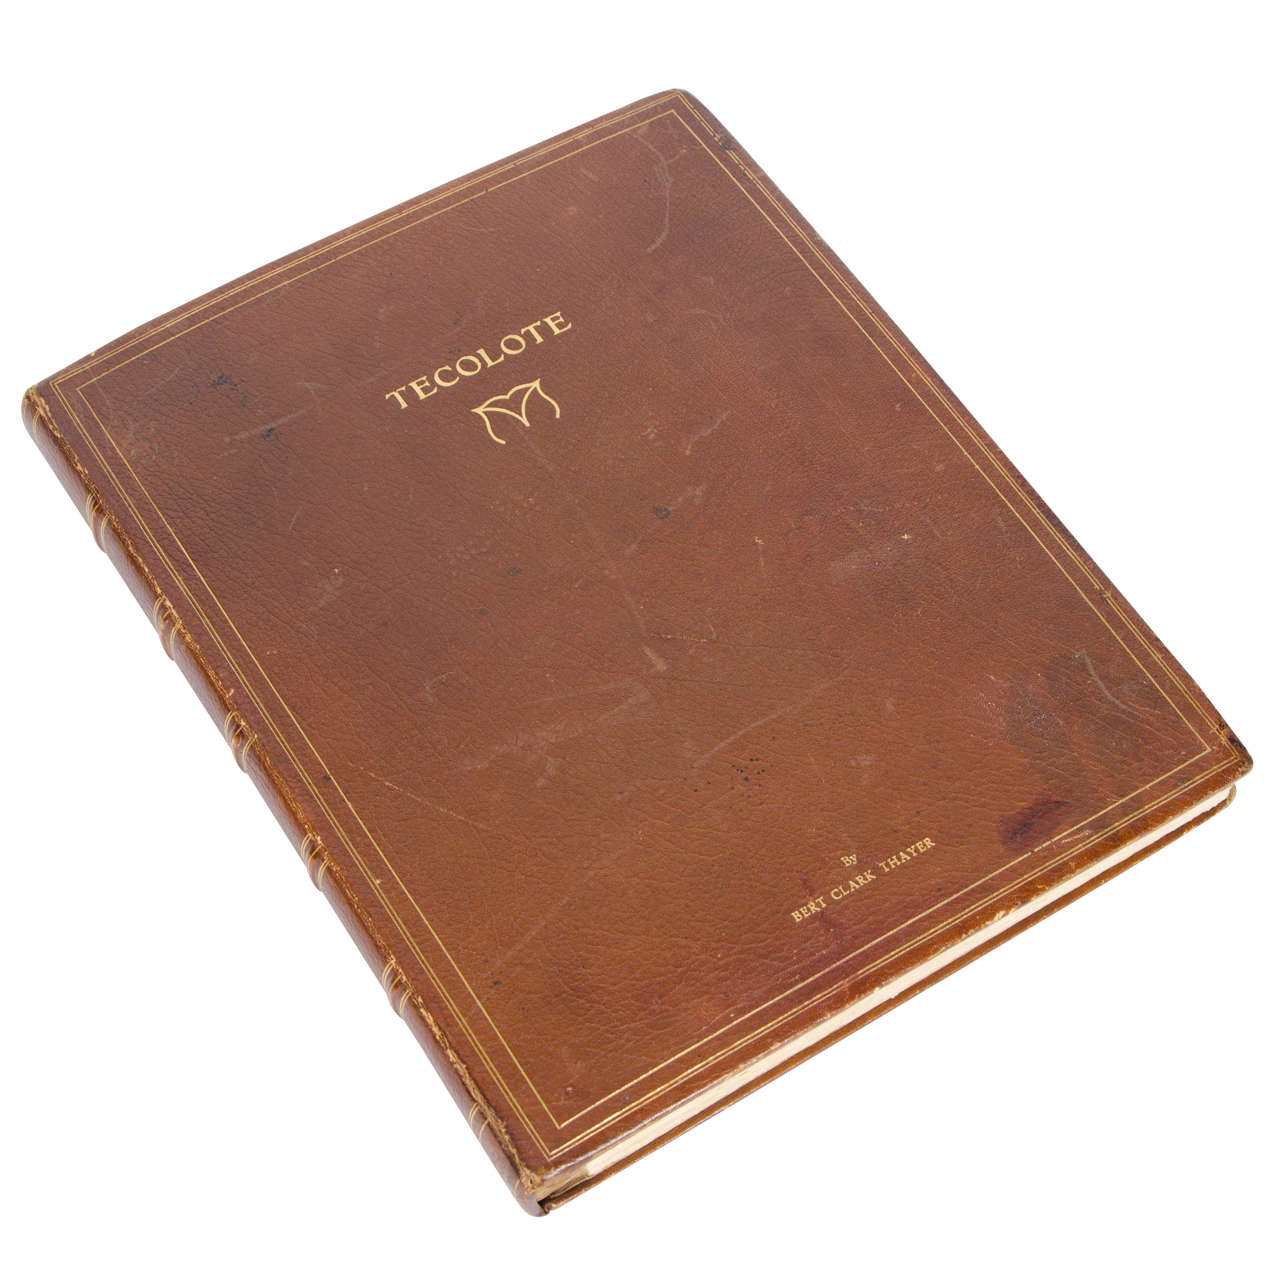 Photograph Album by Bert C Thayer, "Tecolote", with watercolours by Ed Borein. For Sale